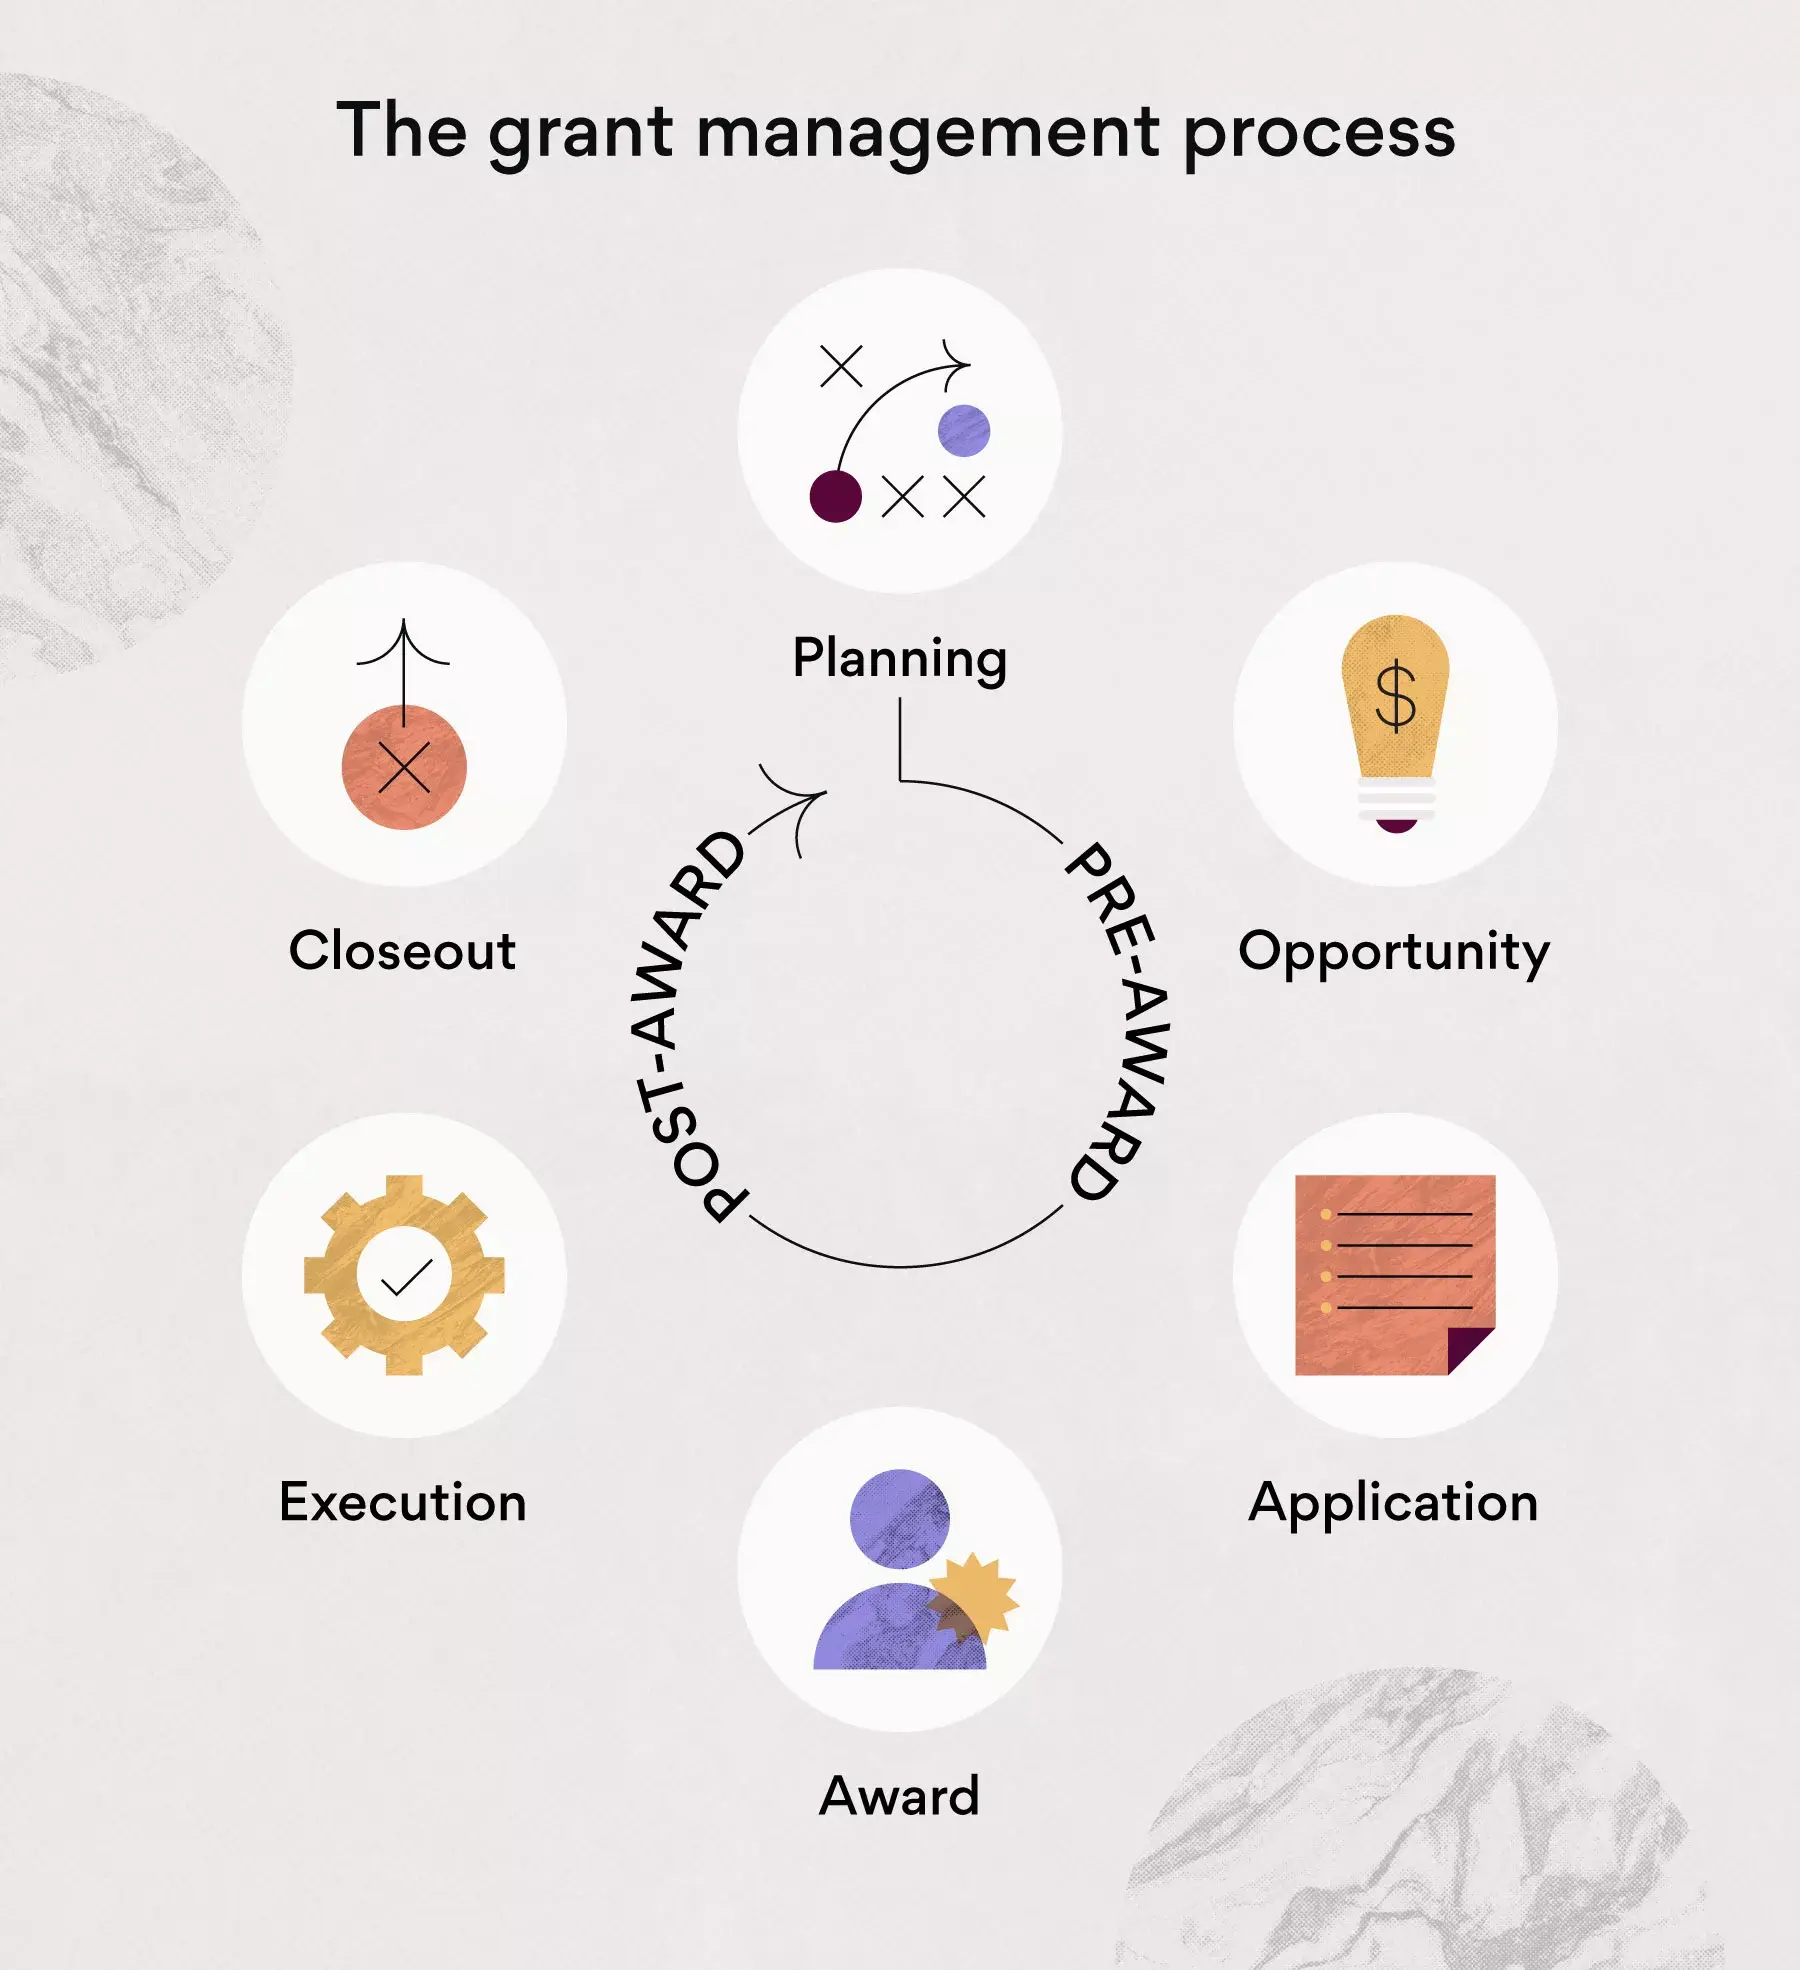 The grant management process